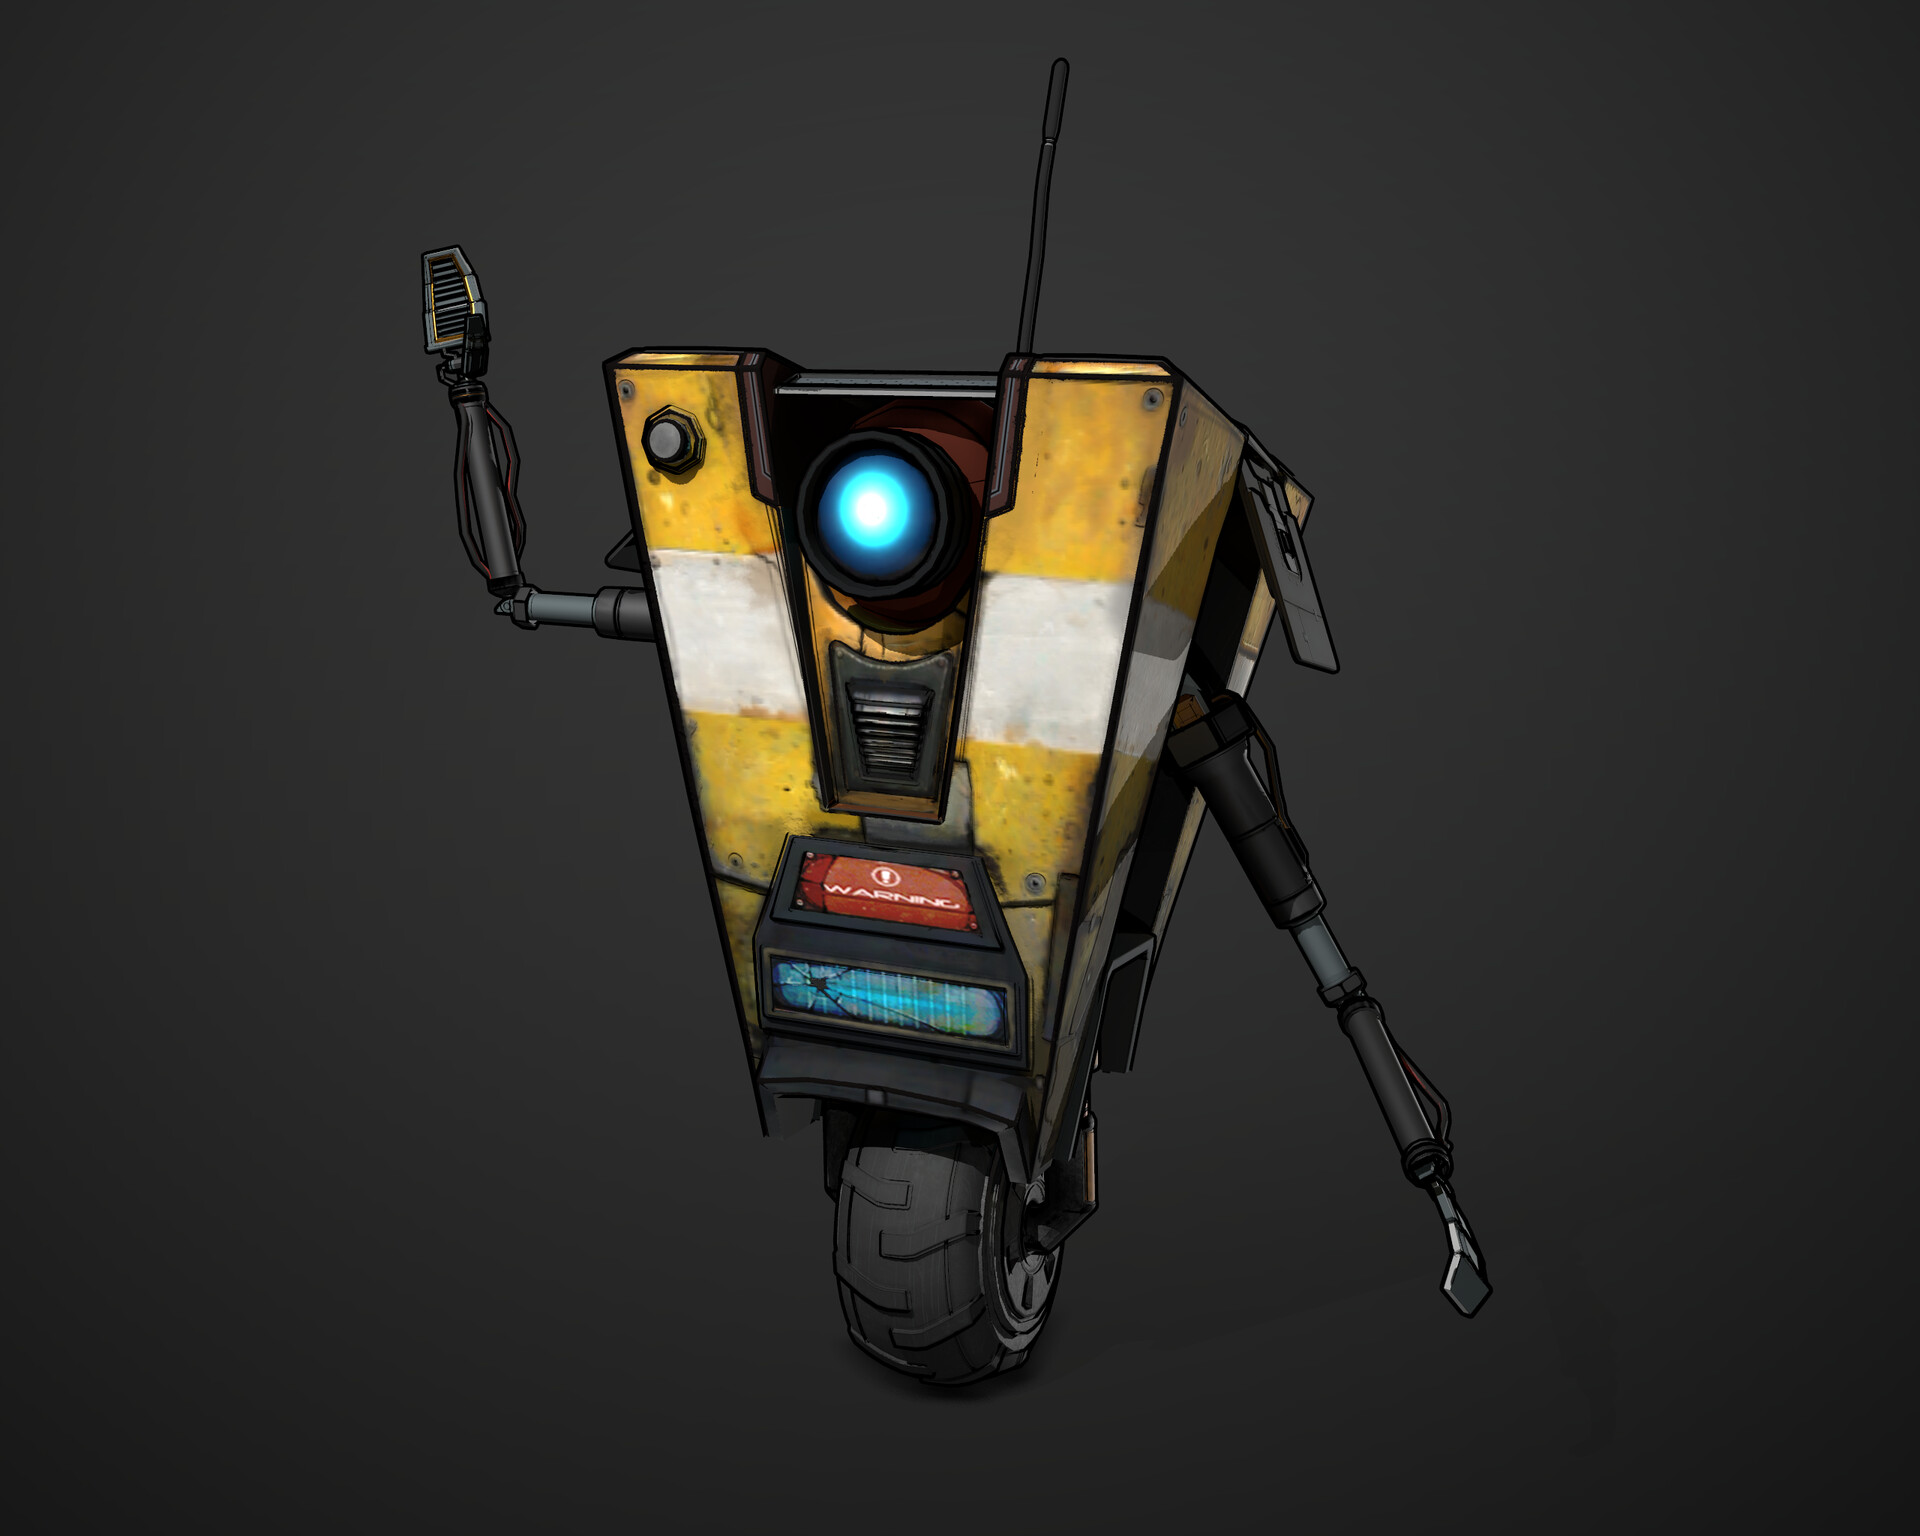 Fan Art of Clap-trap from the game Borderlands. 